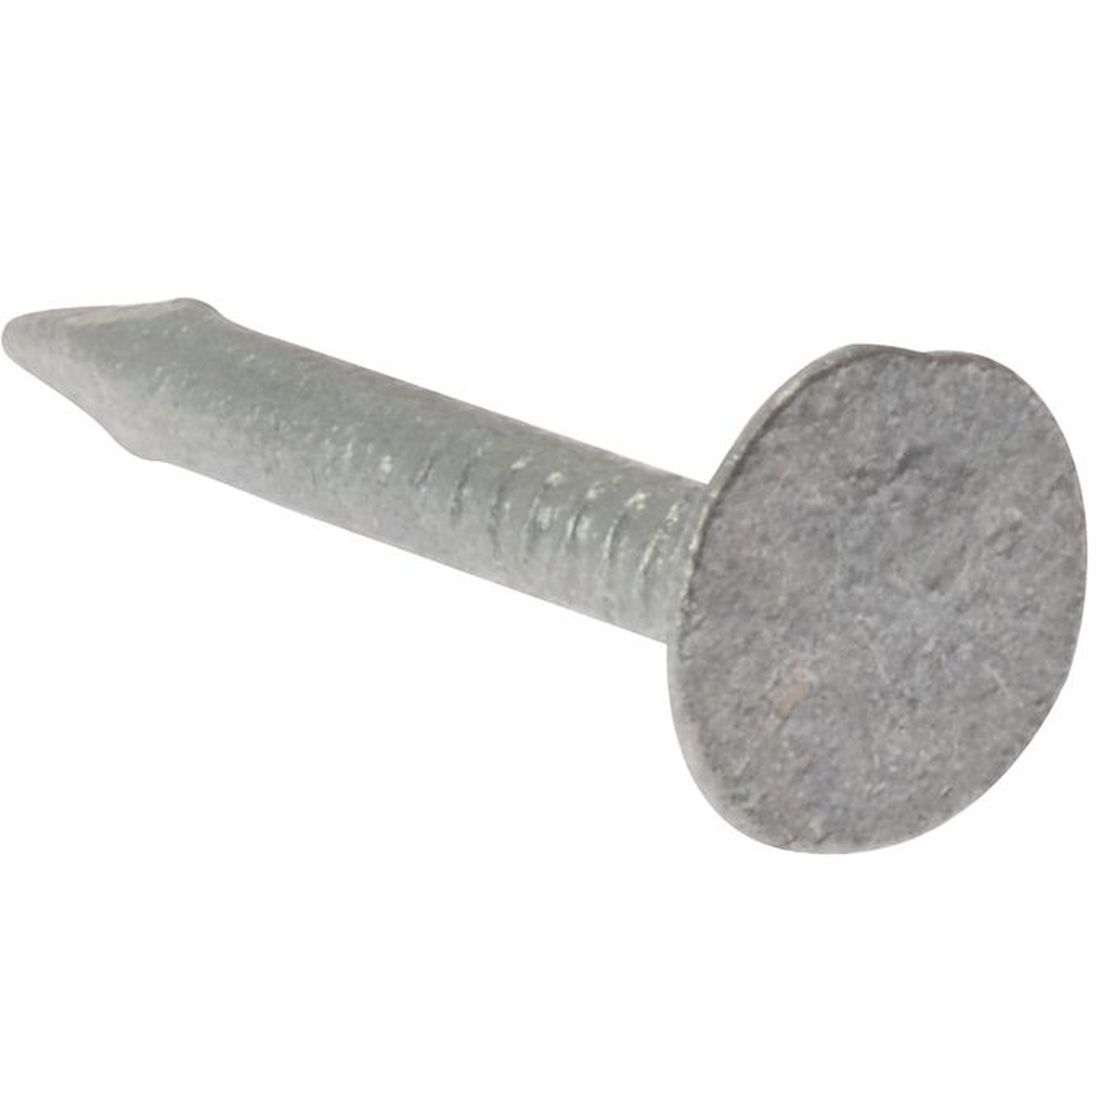 ForgeFix Clout Nail Extra Large Head Galvanised 30mm (2.5kg Bag)                         